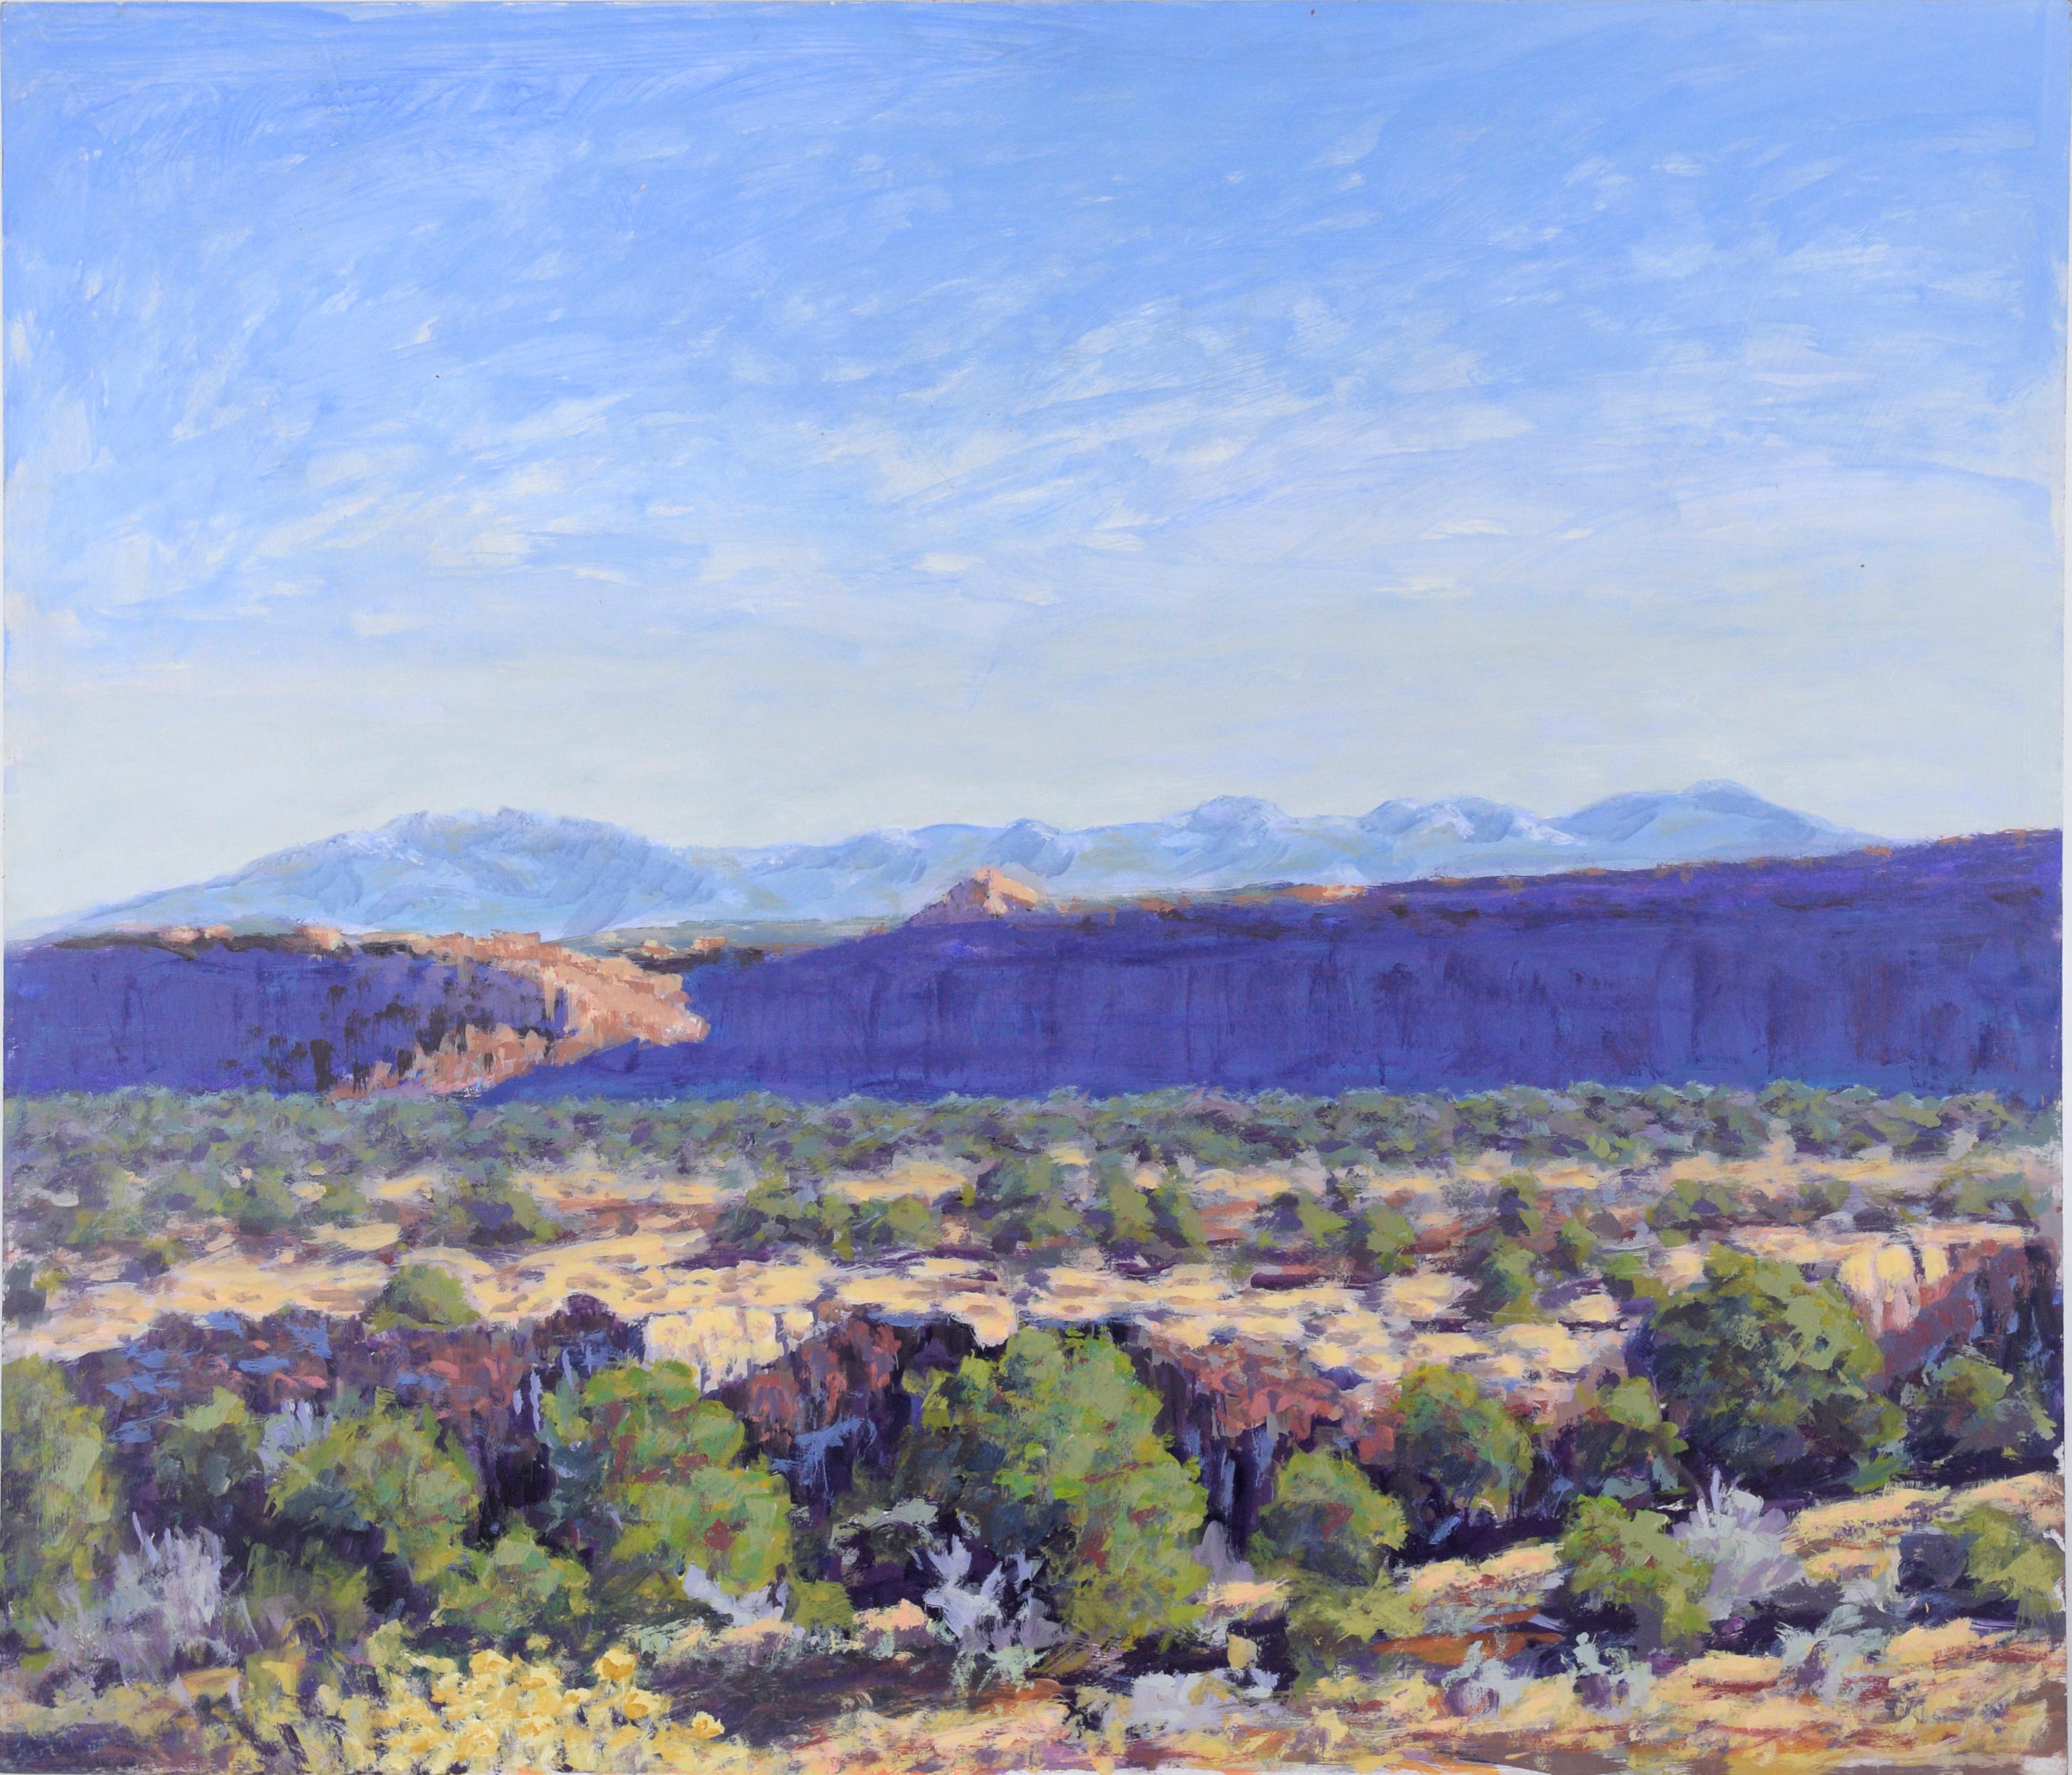 Nick White Landscape Painting - Canyonland - Western Plein Aire Landscape Acrylic on Board